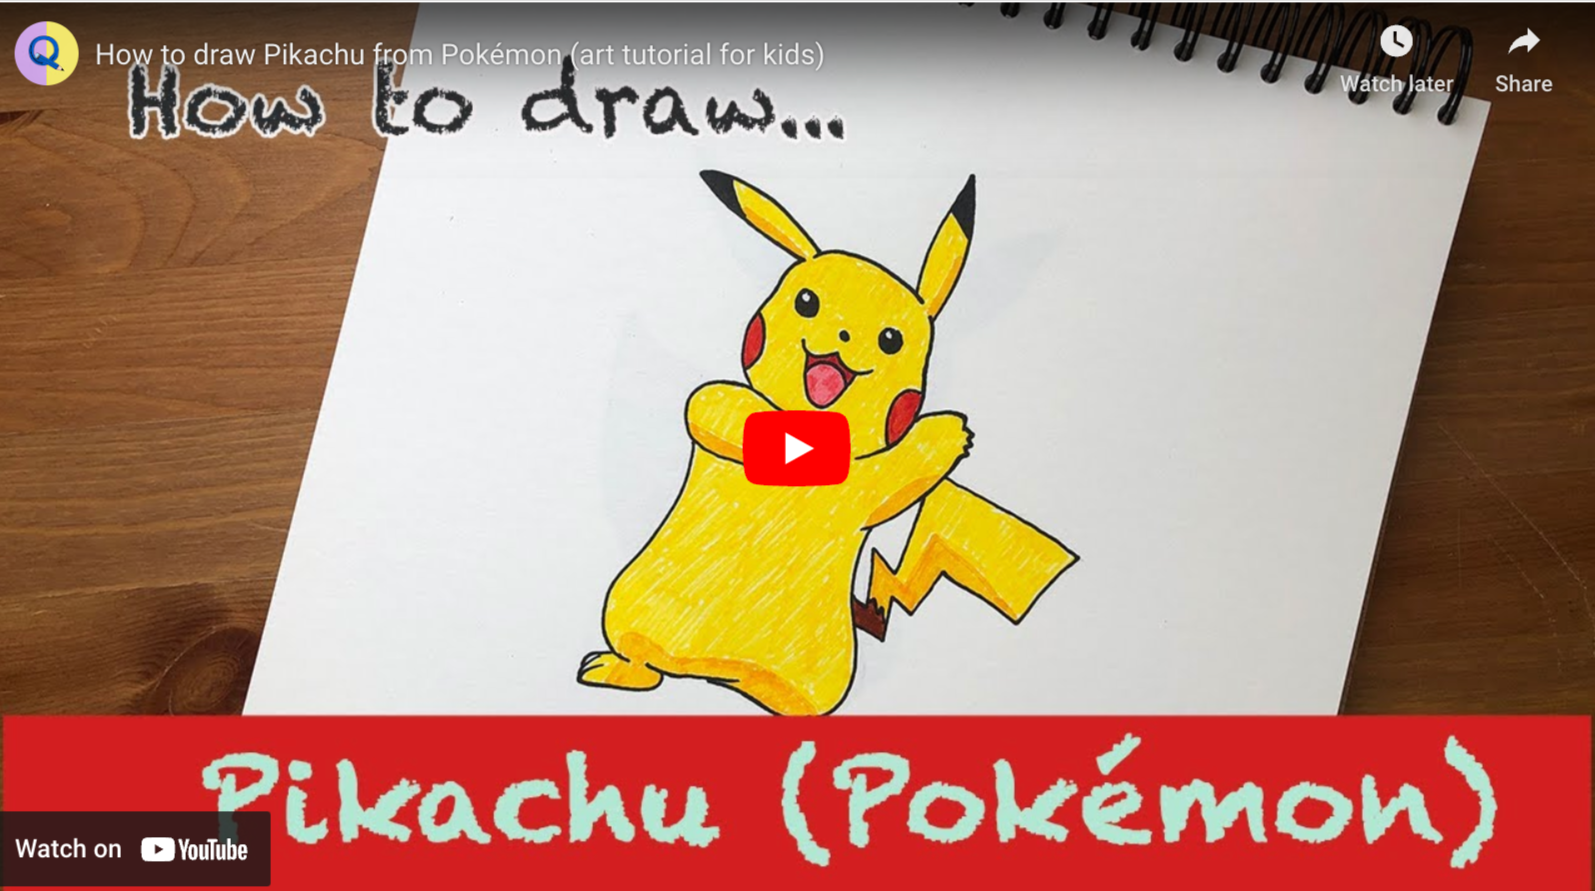 Load video: How to draw Pikachu video